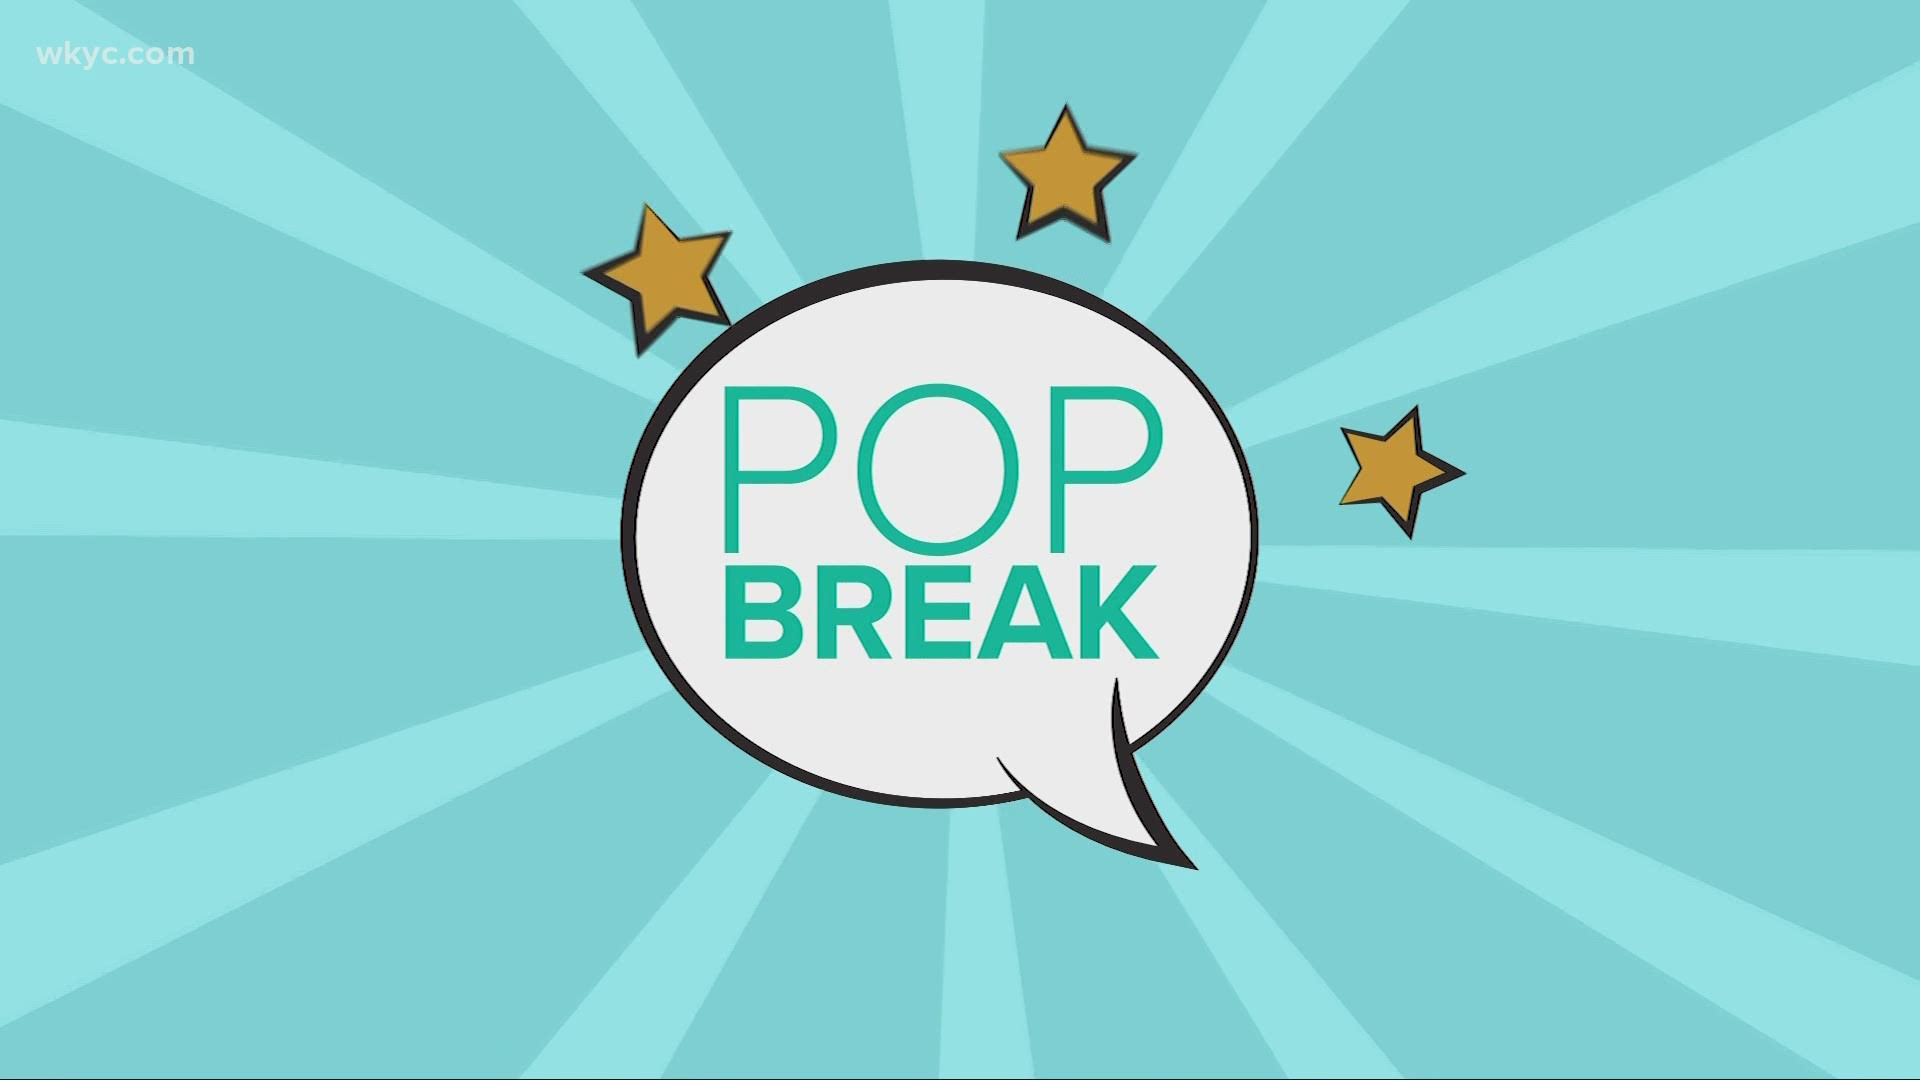 Why did Taylor Swift donate 30 grand to a very lucky fan?  Here's the answer in Pop Break.